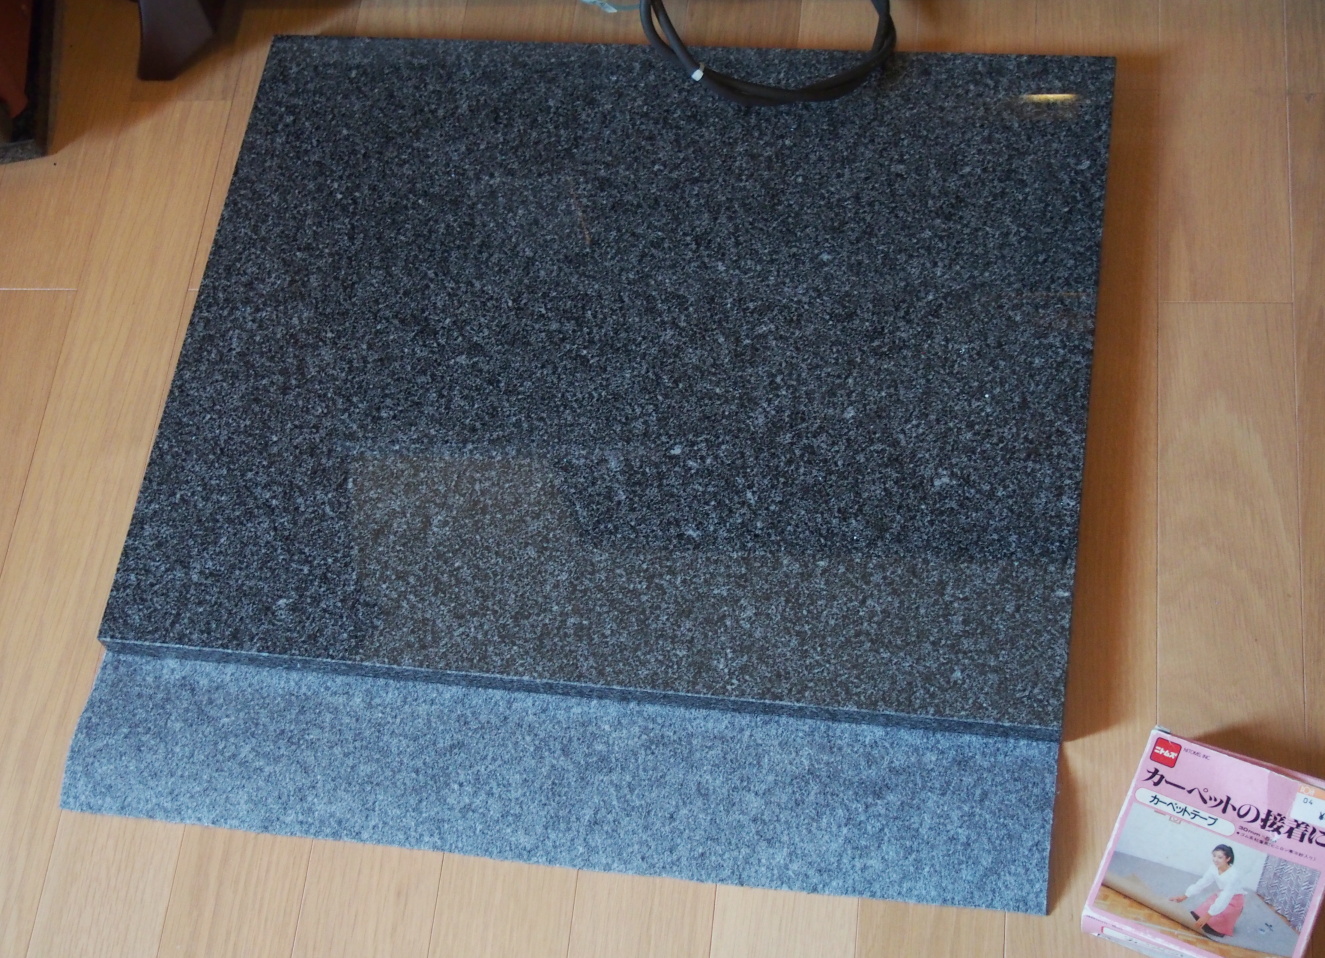 13. Granite base with carpet attached on it (BD10)